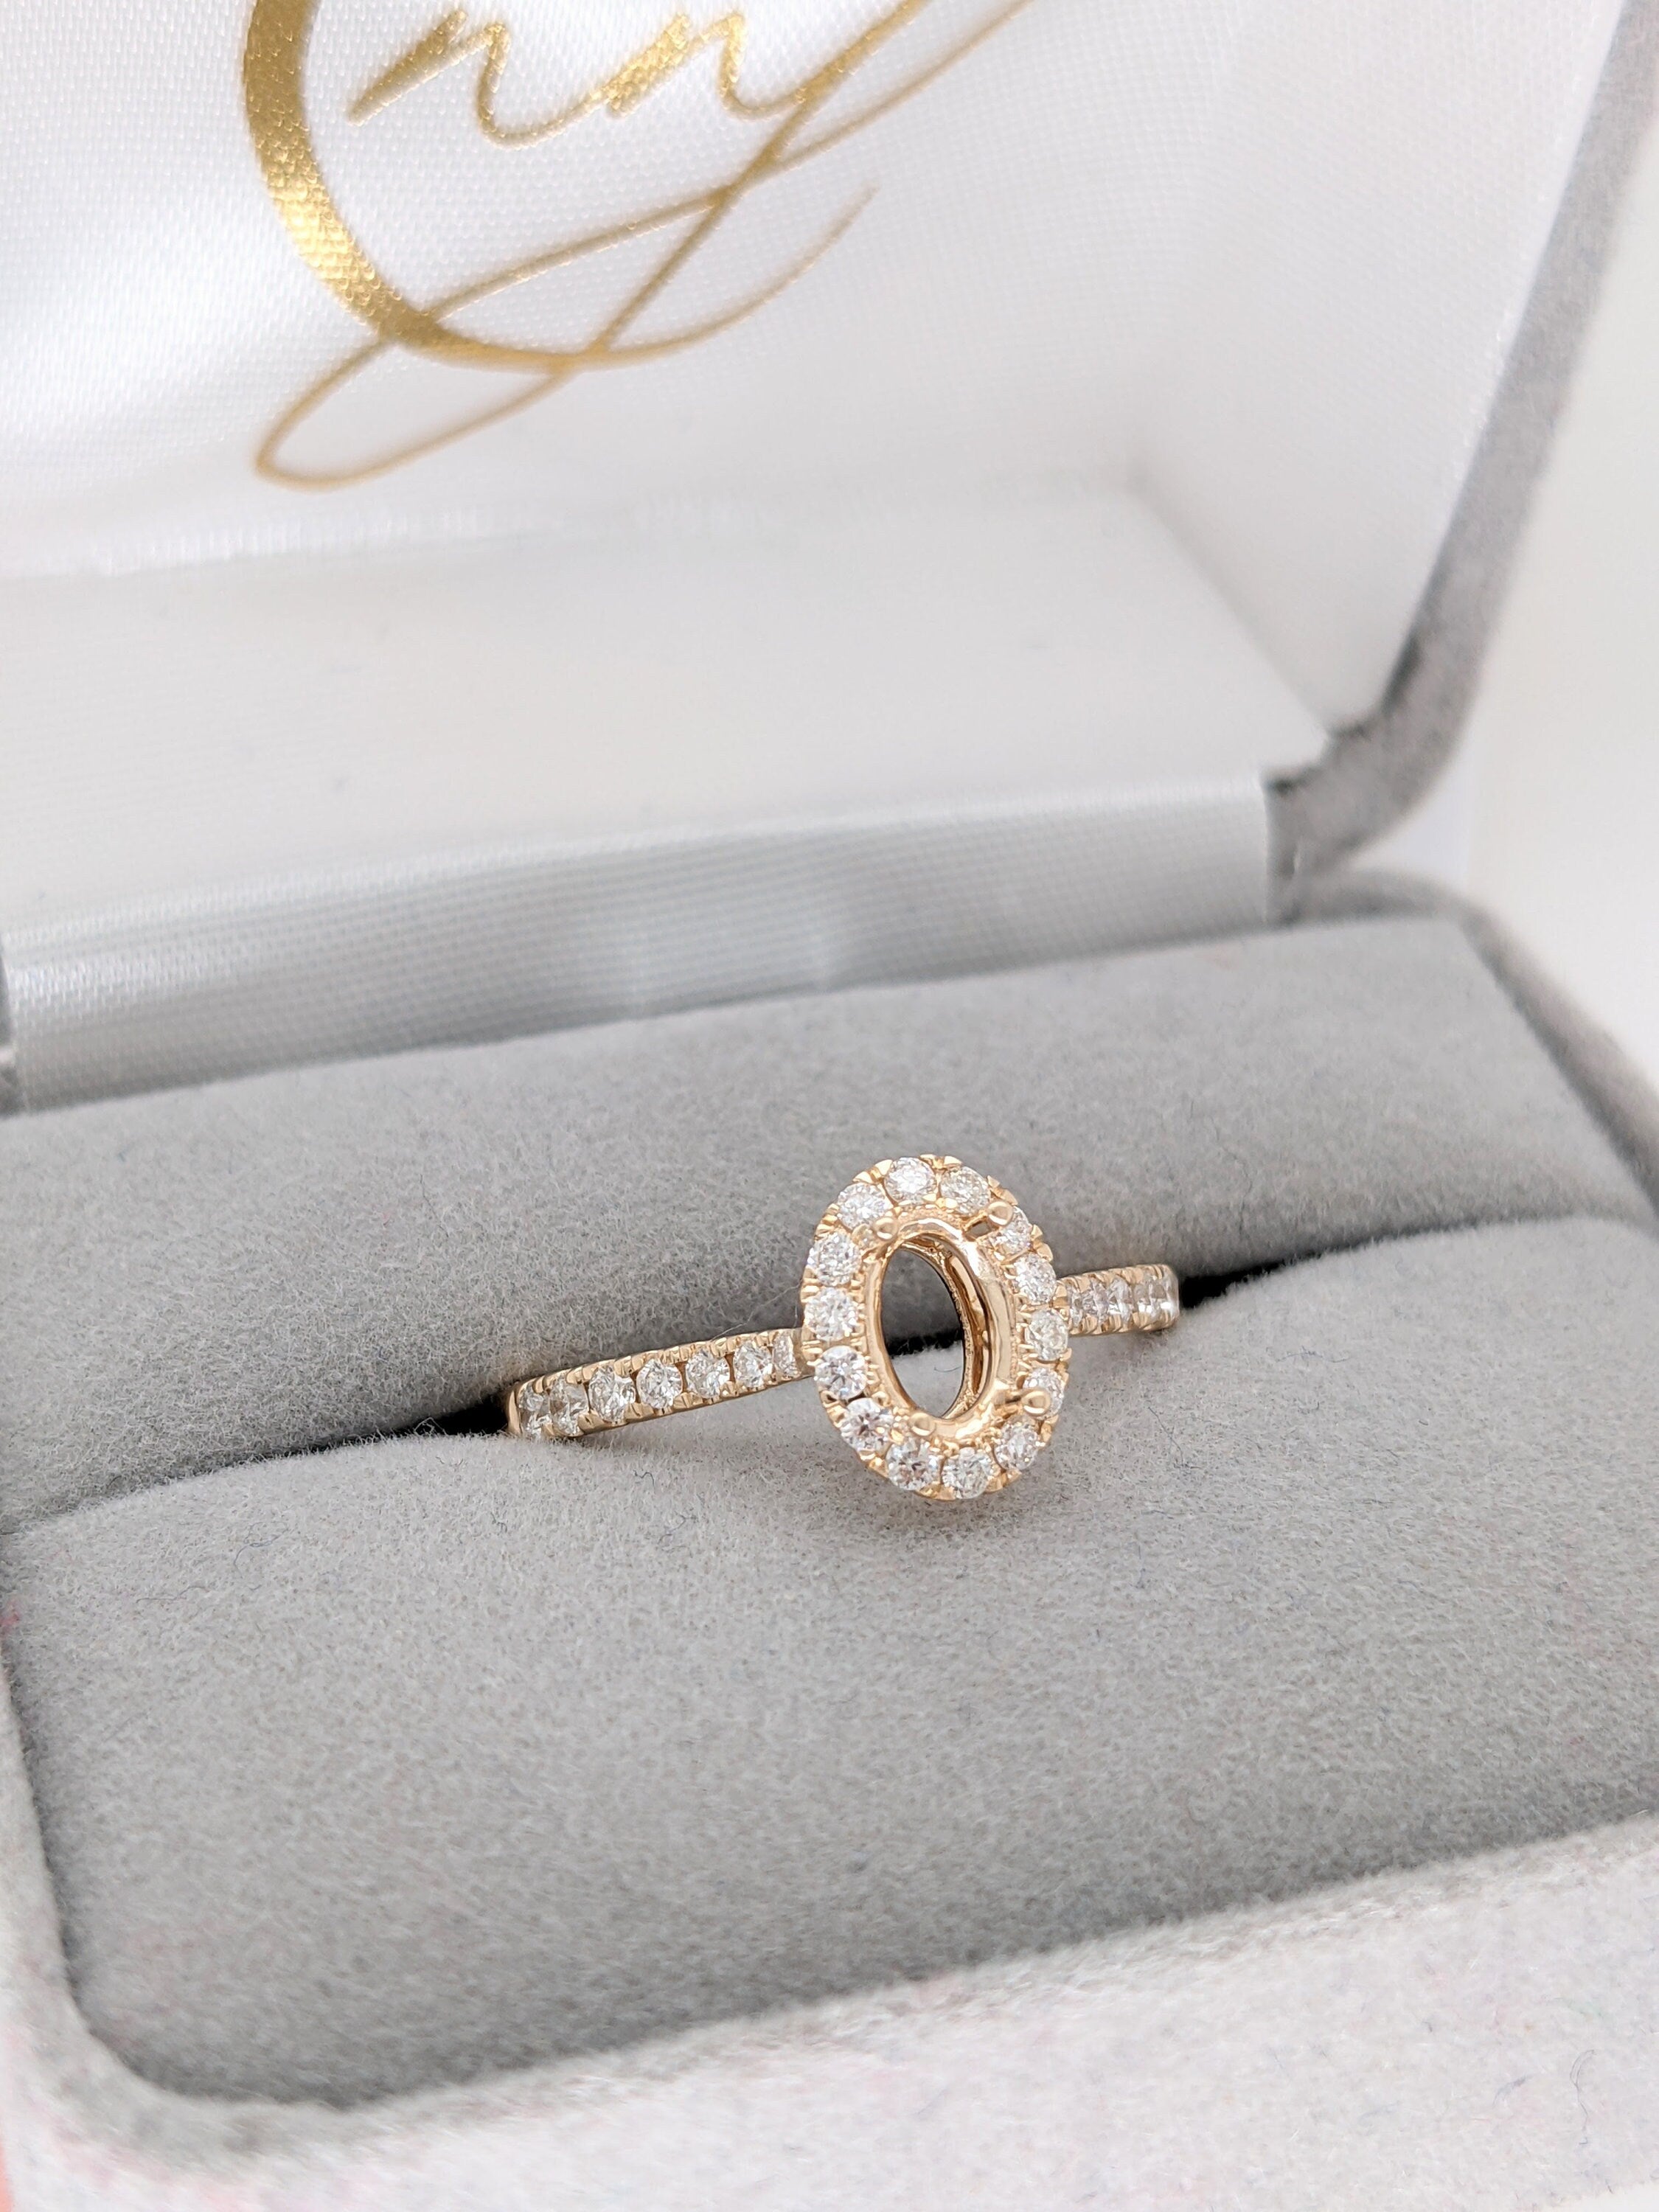 Natural Diamond Halo Semi Mount in 14K Solid Gold | Oval Prong Setting | Custom Sizes | Classic Ring Design | Engagement Ring Semi Mount